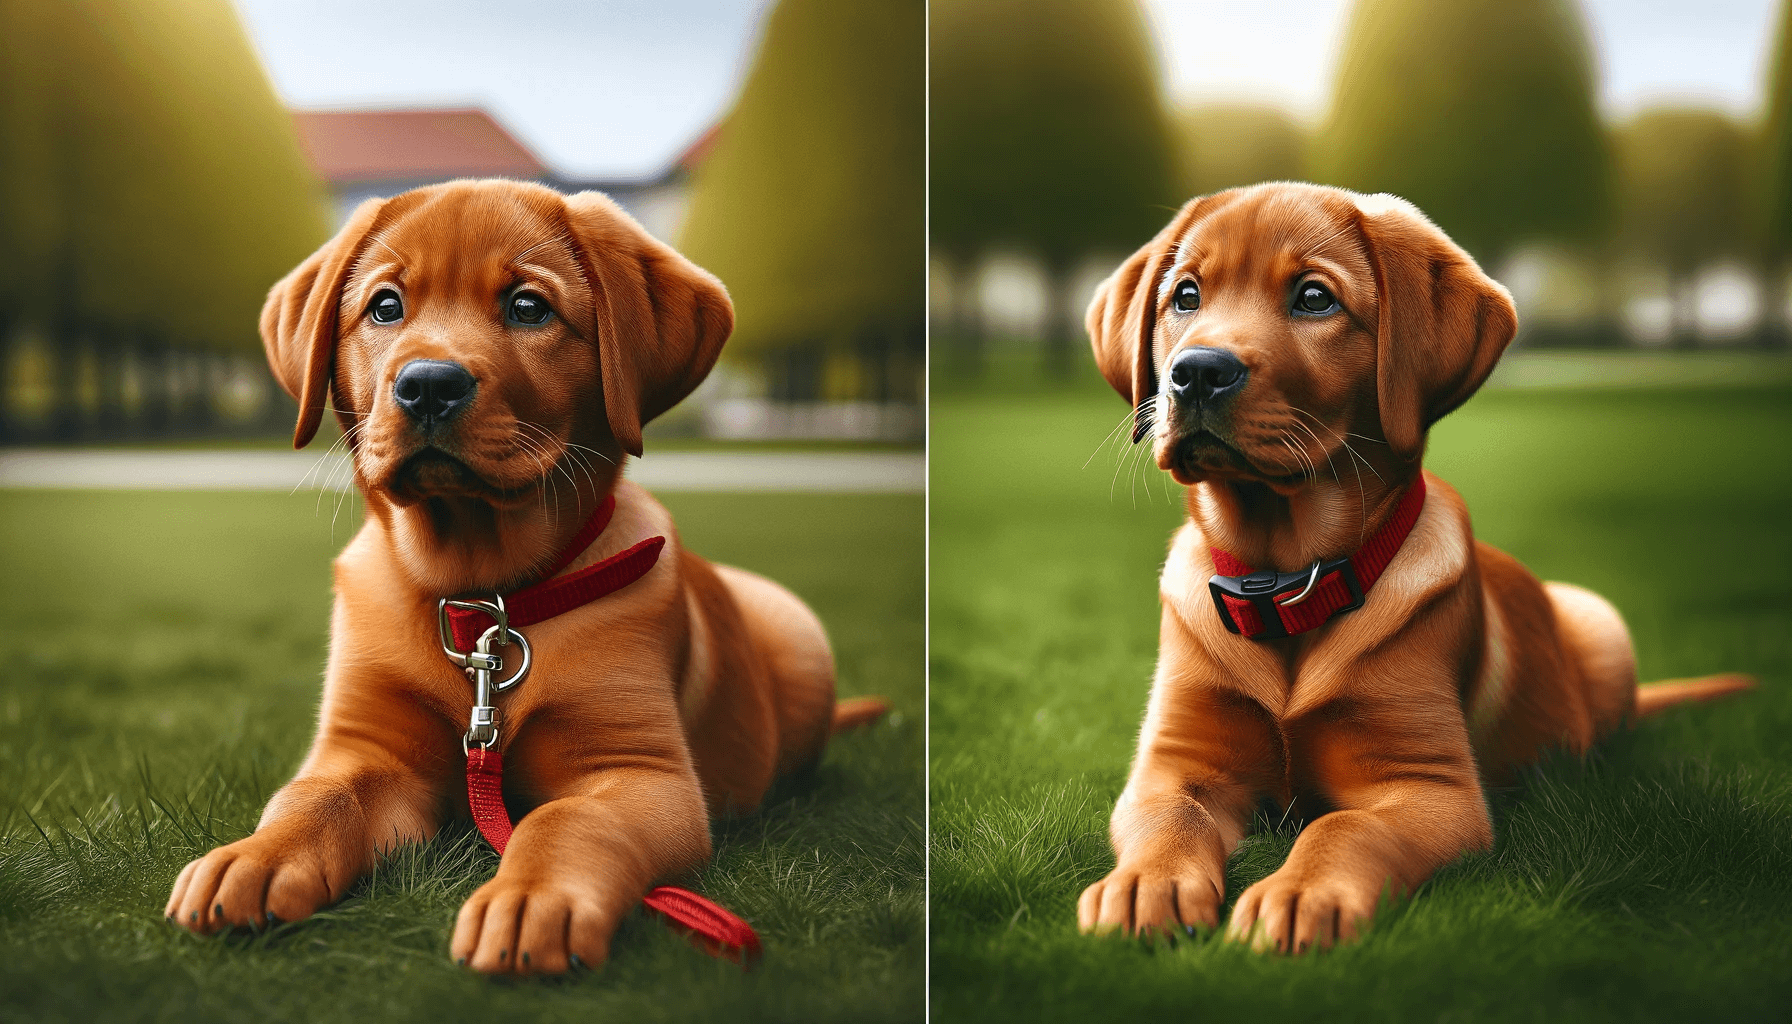 Fox Red Labrador puppy with a rich reddish-brown coat